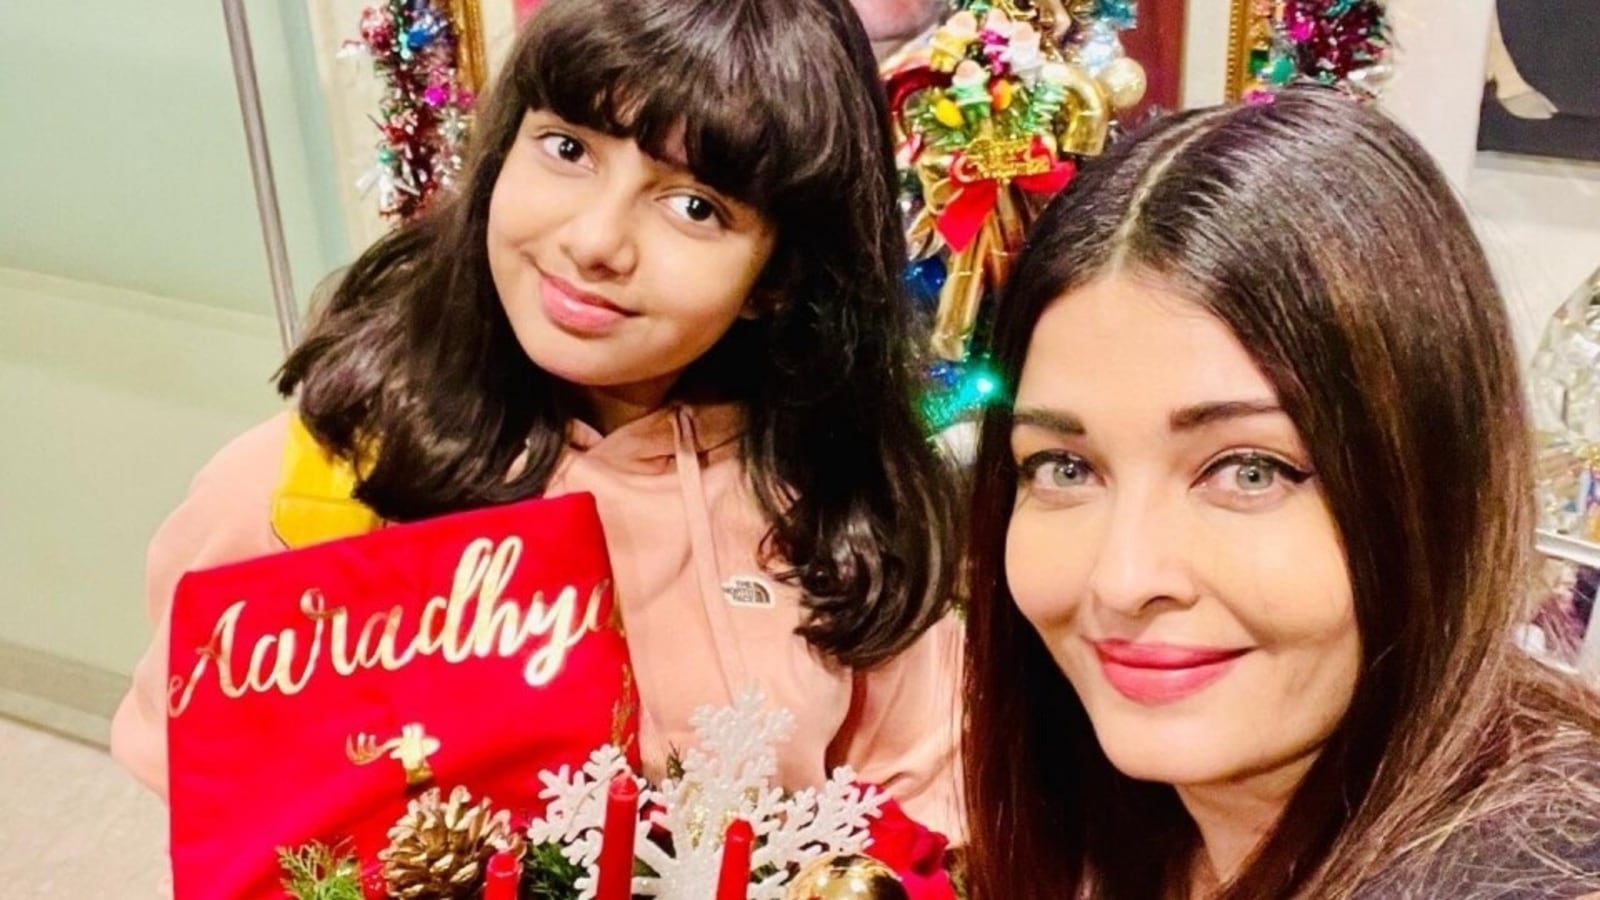 Aishwarya Rai celebrates Christmas with daughter Aaradhya Bachchan, shares an adorable pic Check out the post inside